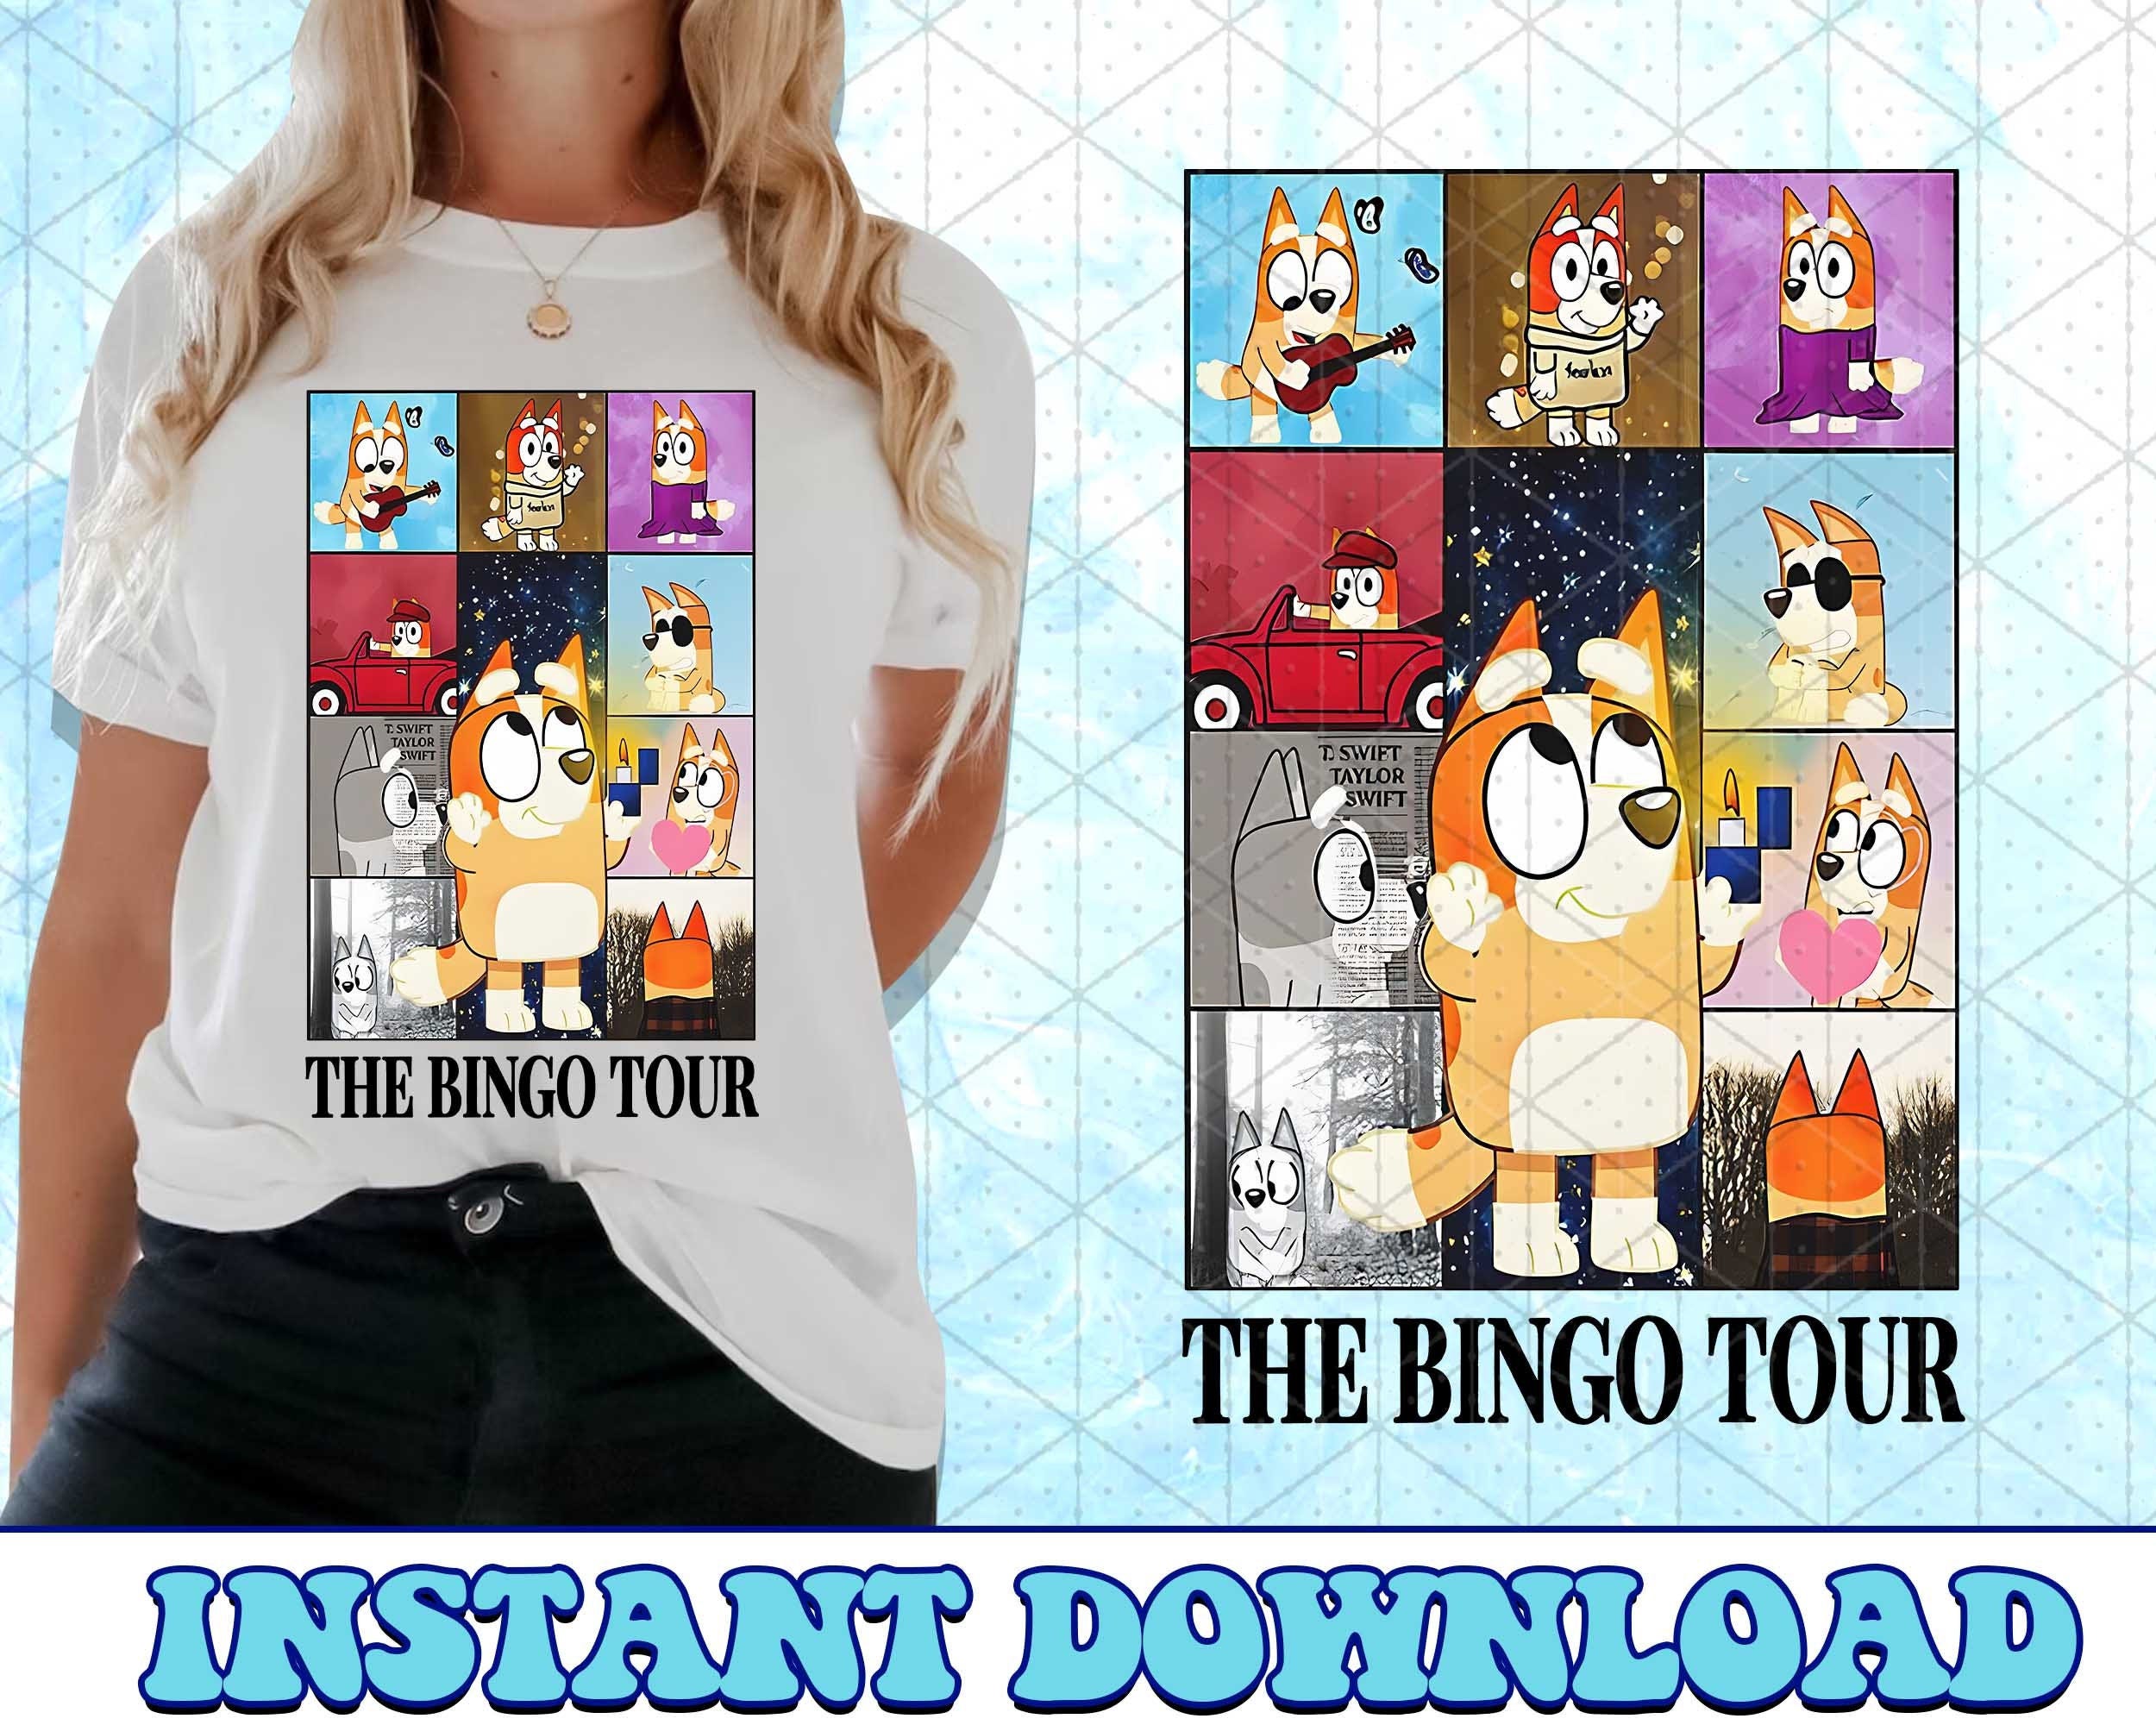 The Bingo tour Bluey PNG, Bluey Family PNG, Bluey The Eras Tour Png, Bluey Bingo Png, Bluey Mom Png, Bluey Dad Png, Bluey Friends Png